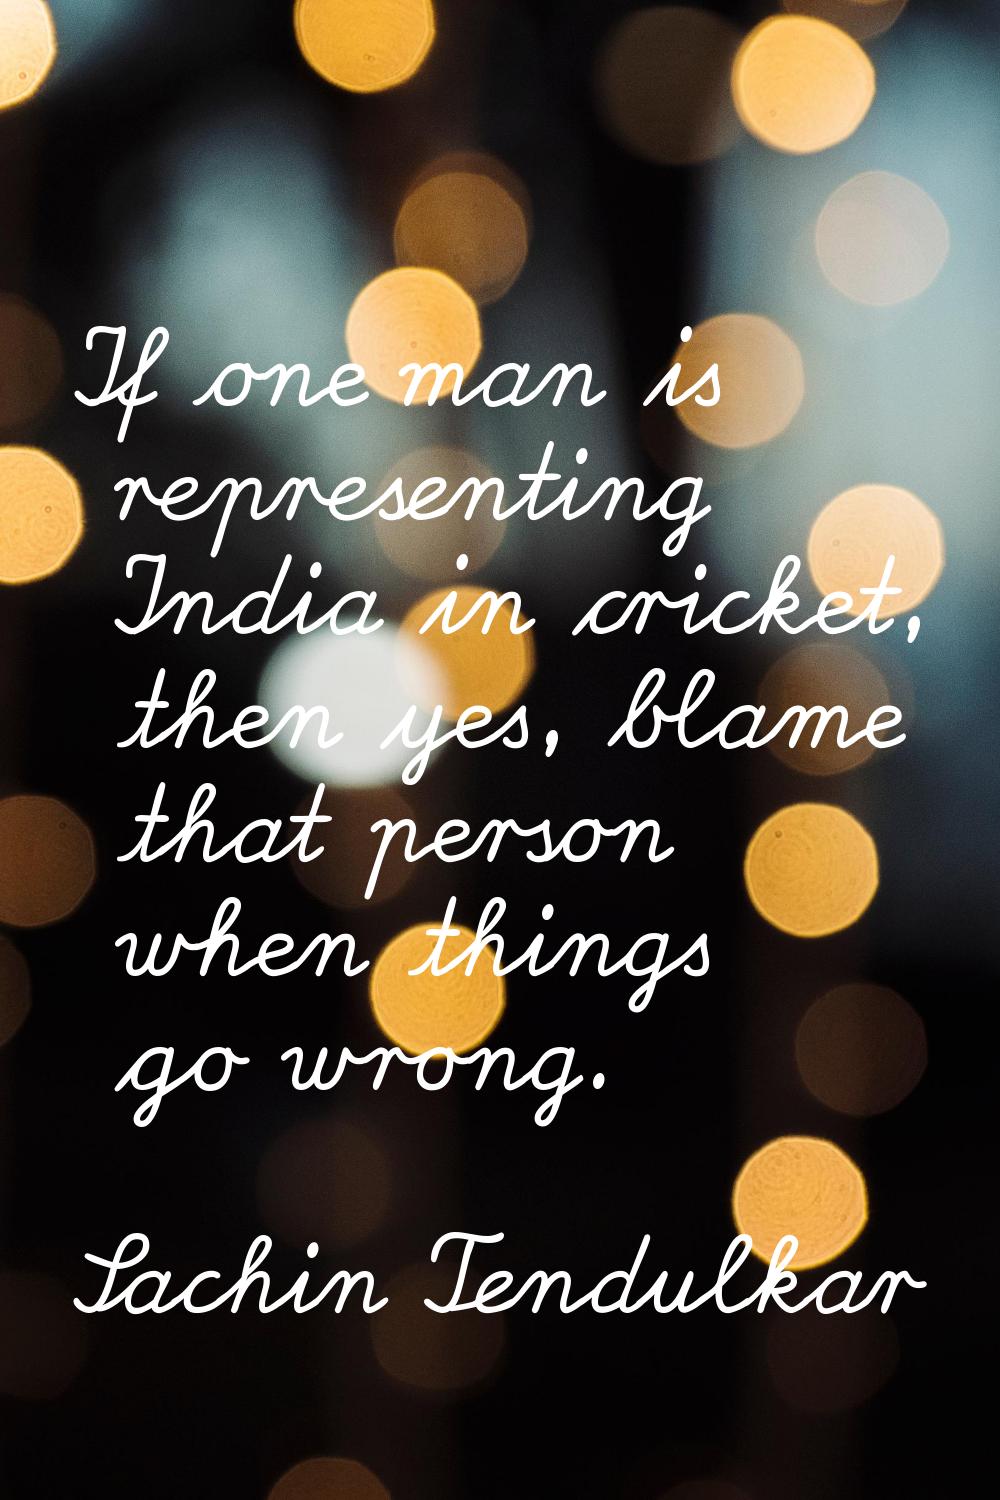 If one man is representing India in cricket, then yes, blame that person when things go wrong.